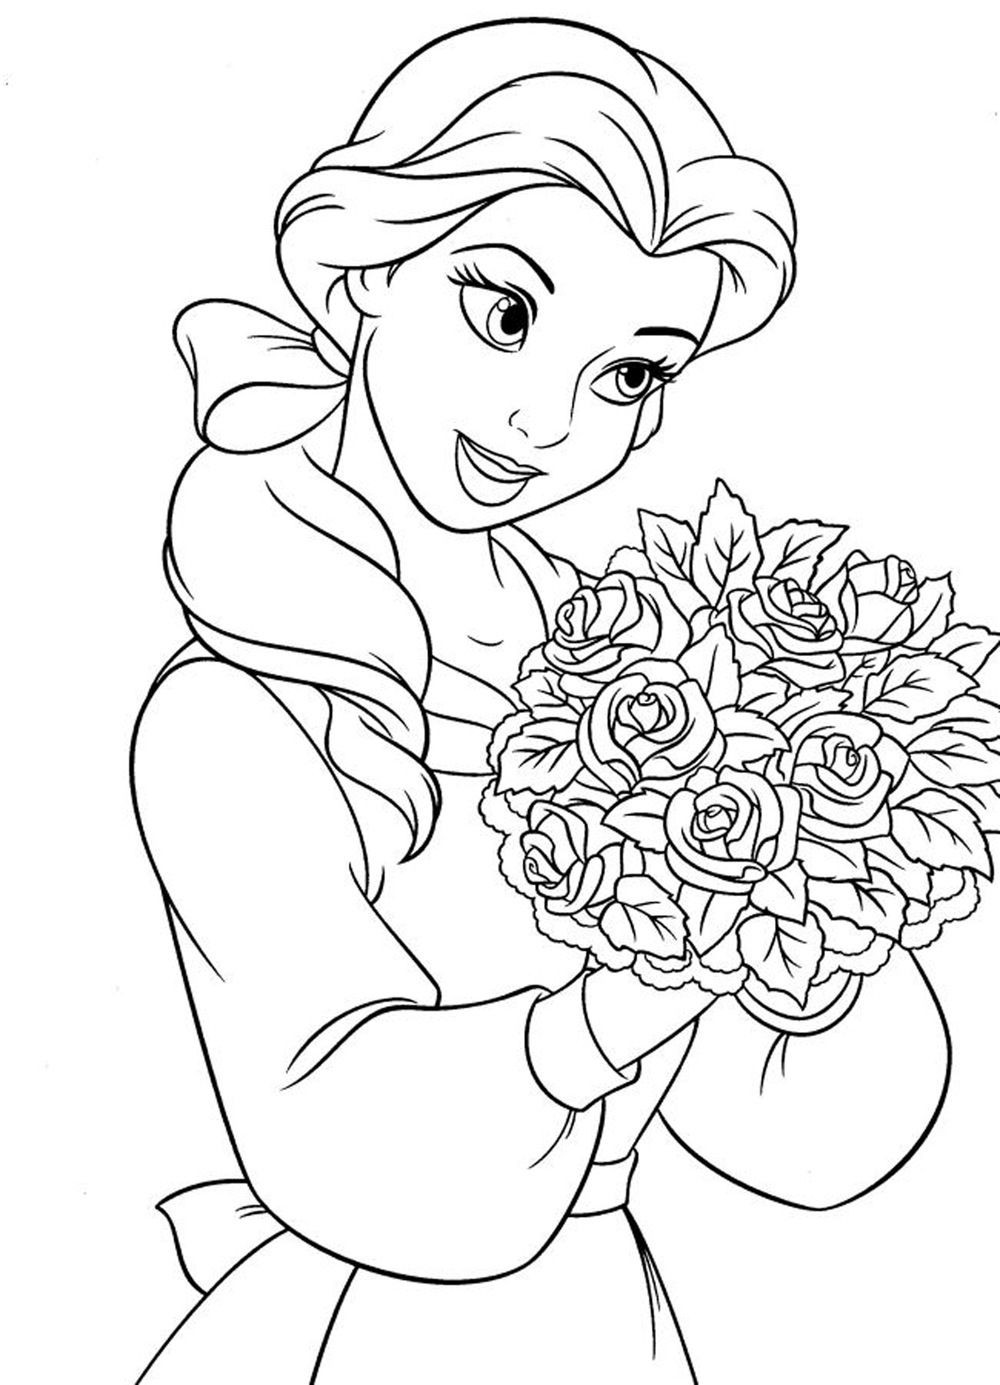 Free Coloring Pages Of Girls
 princess coloring pages for girls Free